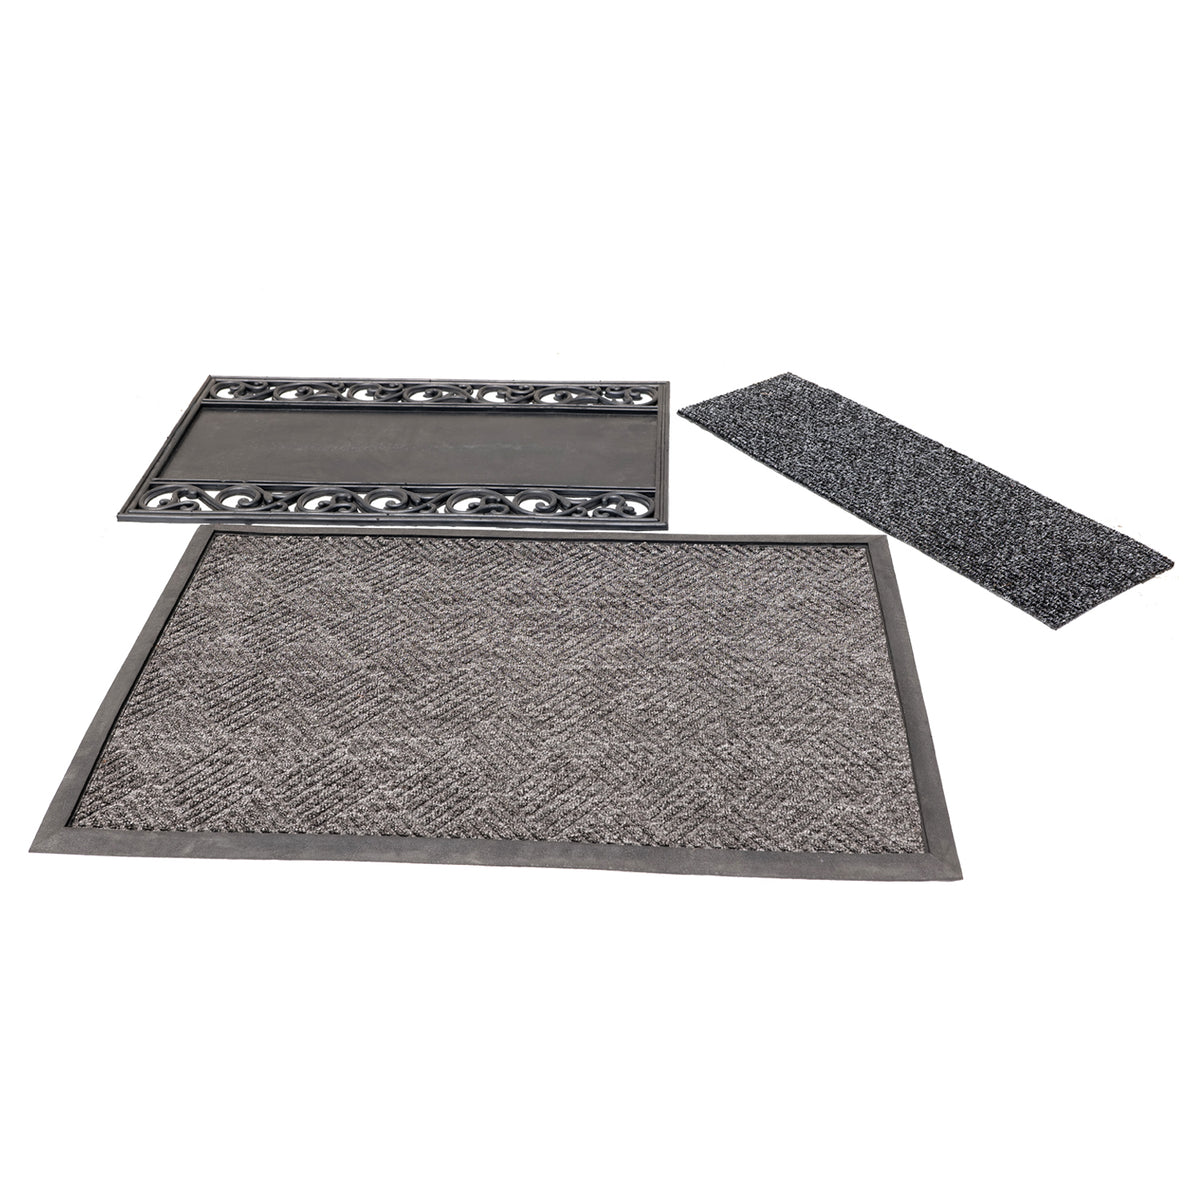 Rubber Tray Sanitize Mat Combo -  Home, Office and Hospitals - OnlyMat